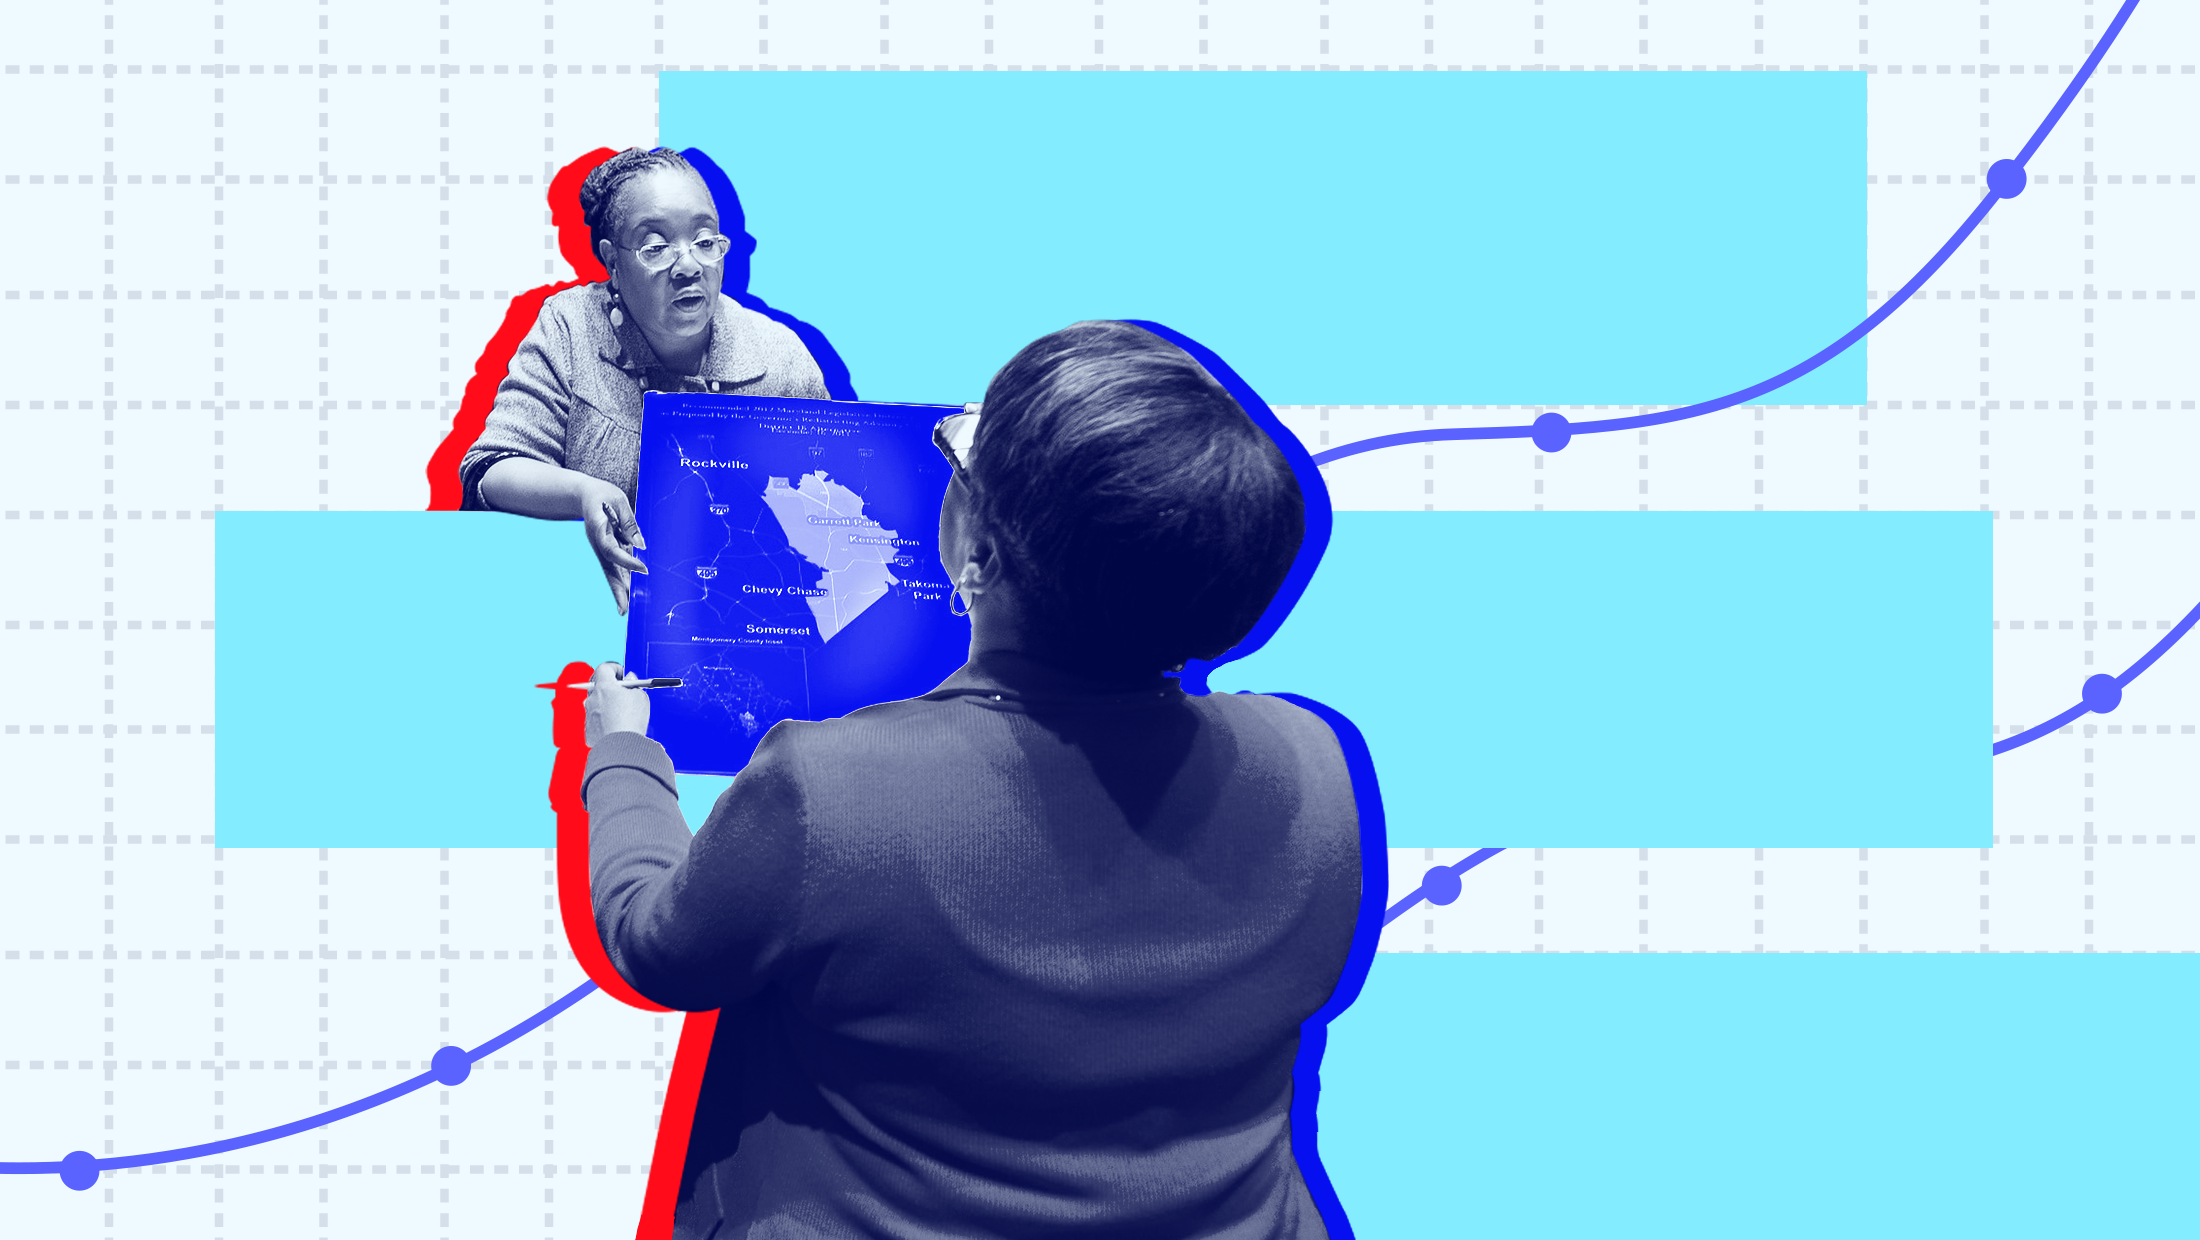 Two women going back and forth discussing a proposed redistricting map, mounted on a piece of graph paper with various data points